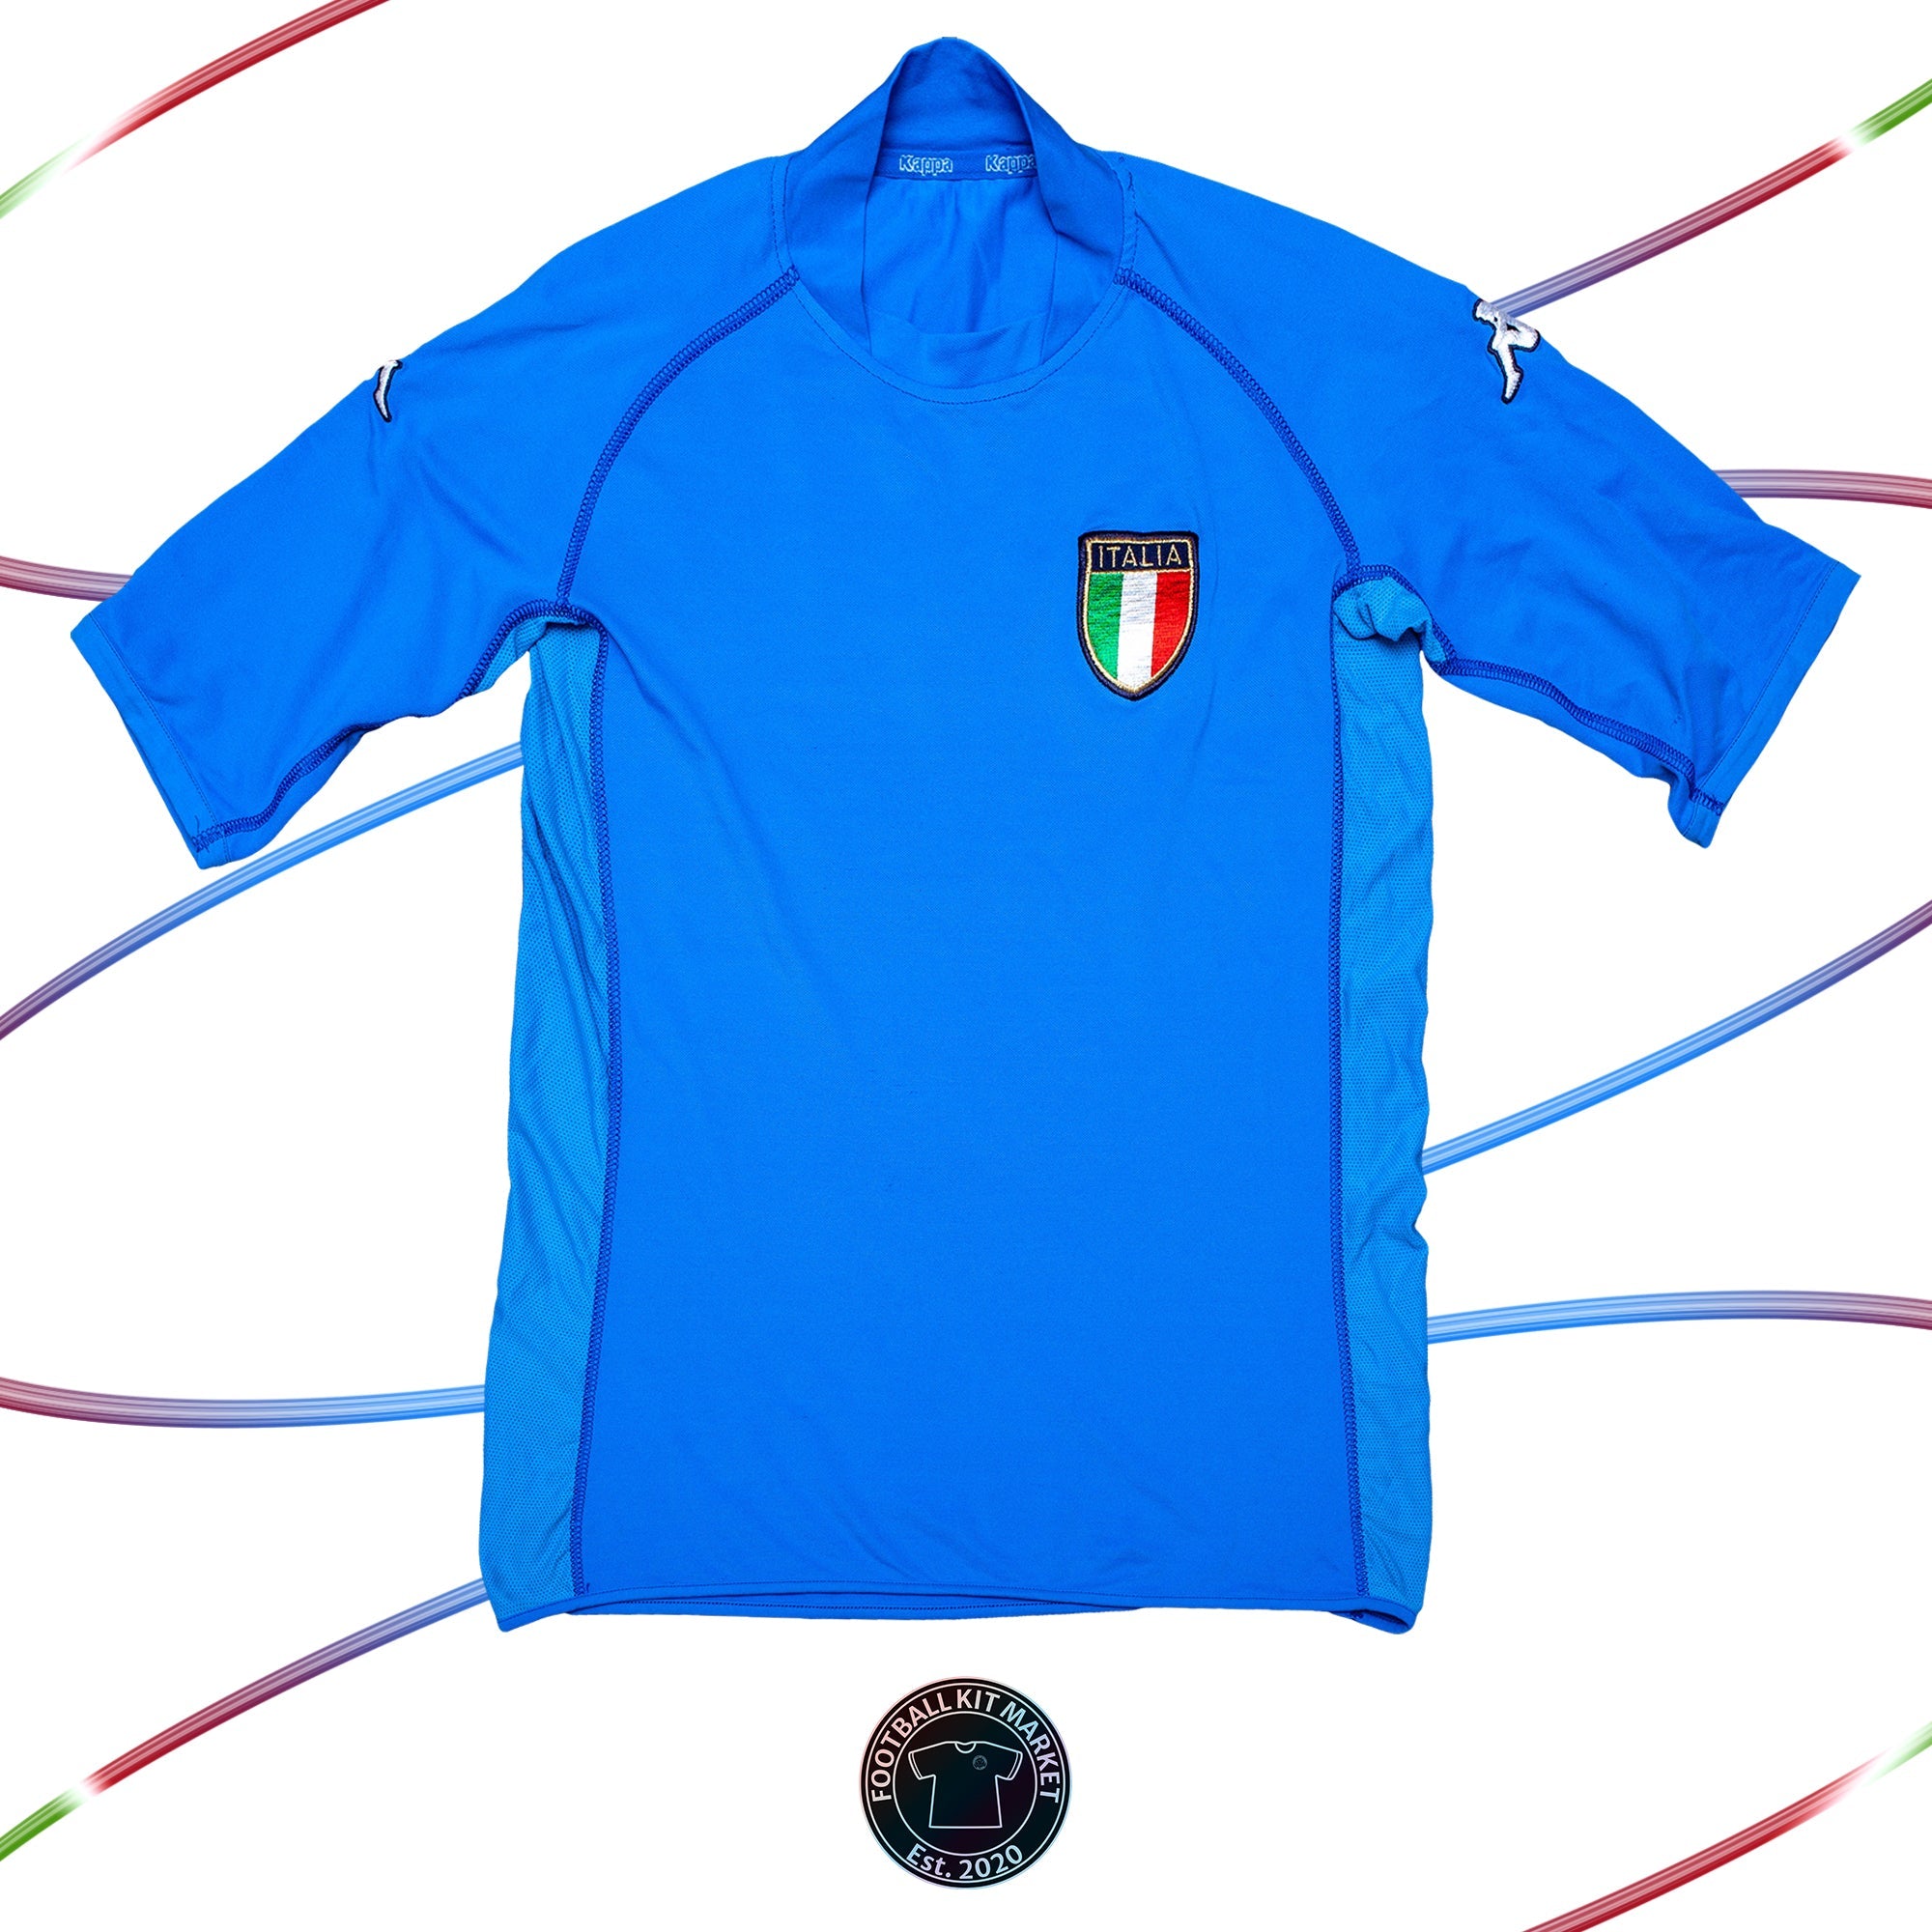 Genuine ITALY Home (2000-2002) - KAPPA (L) - Product Image from Football Kit Market